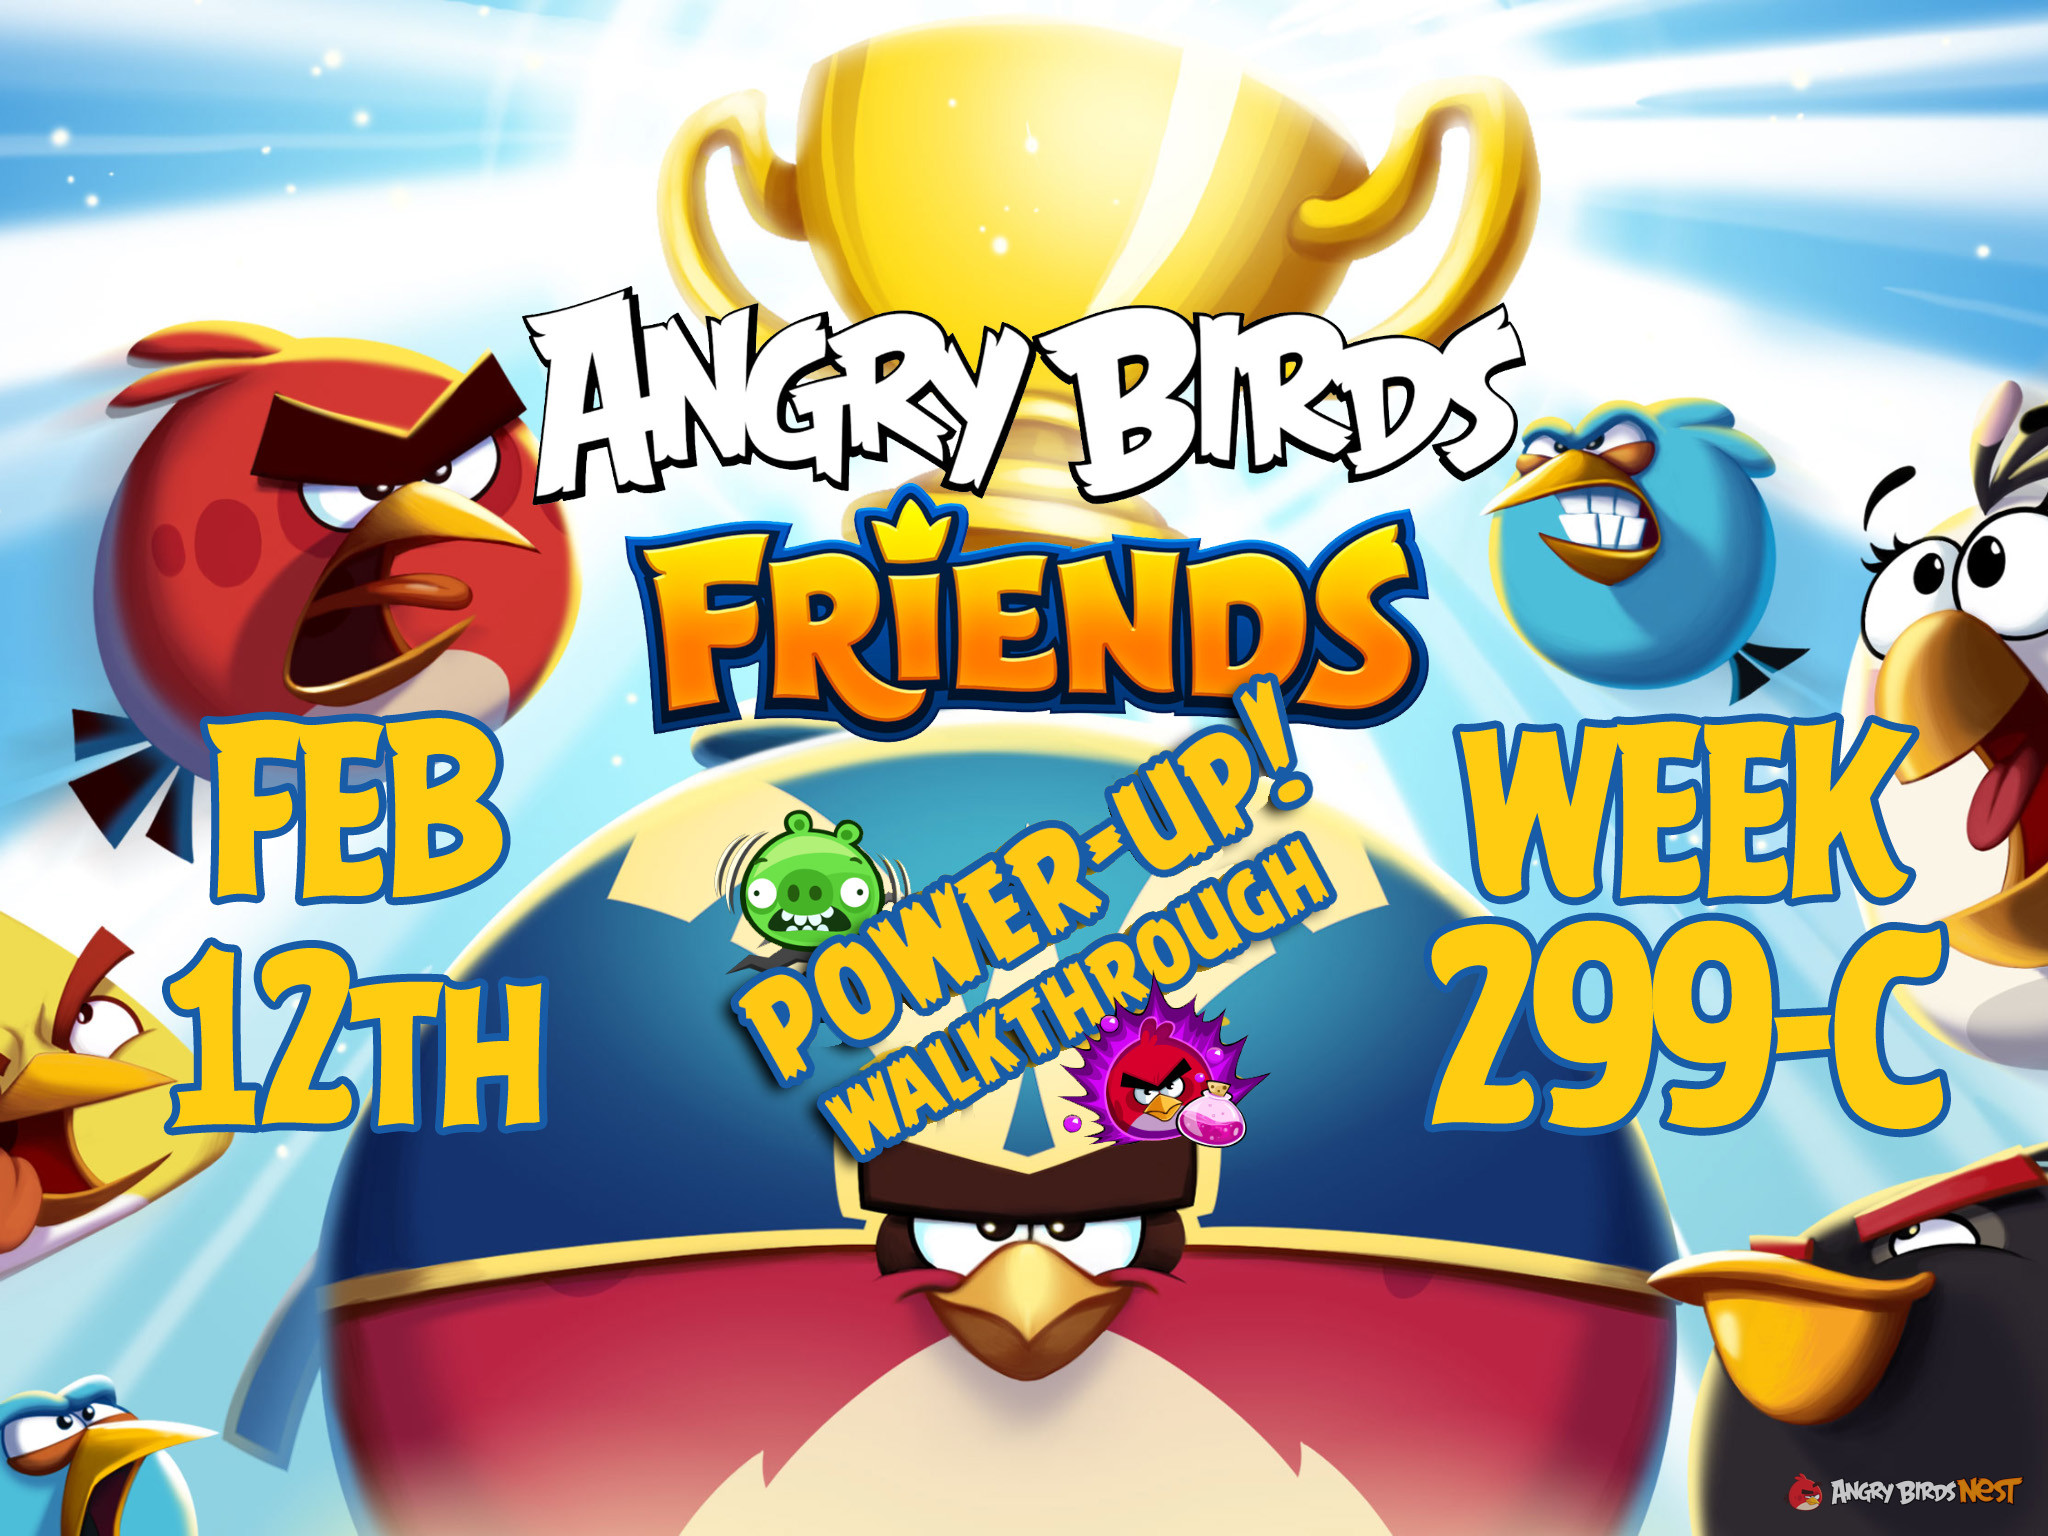 Angry Birds Friends Tournament Week 299-C Feature Image PU